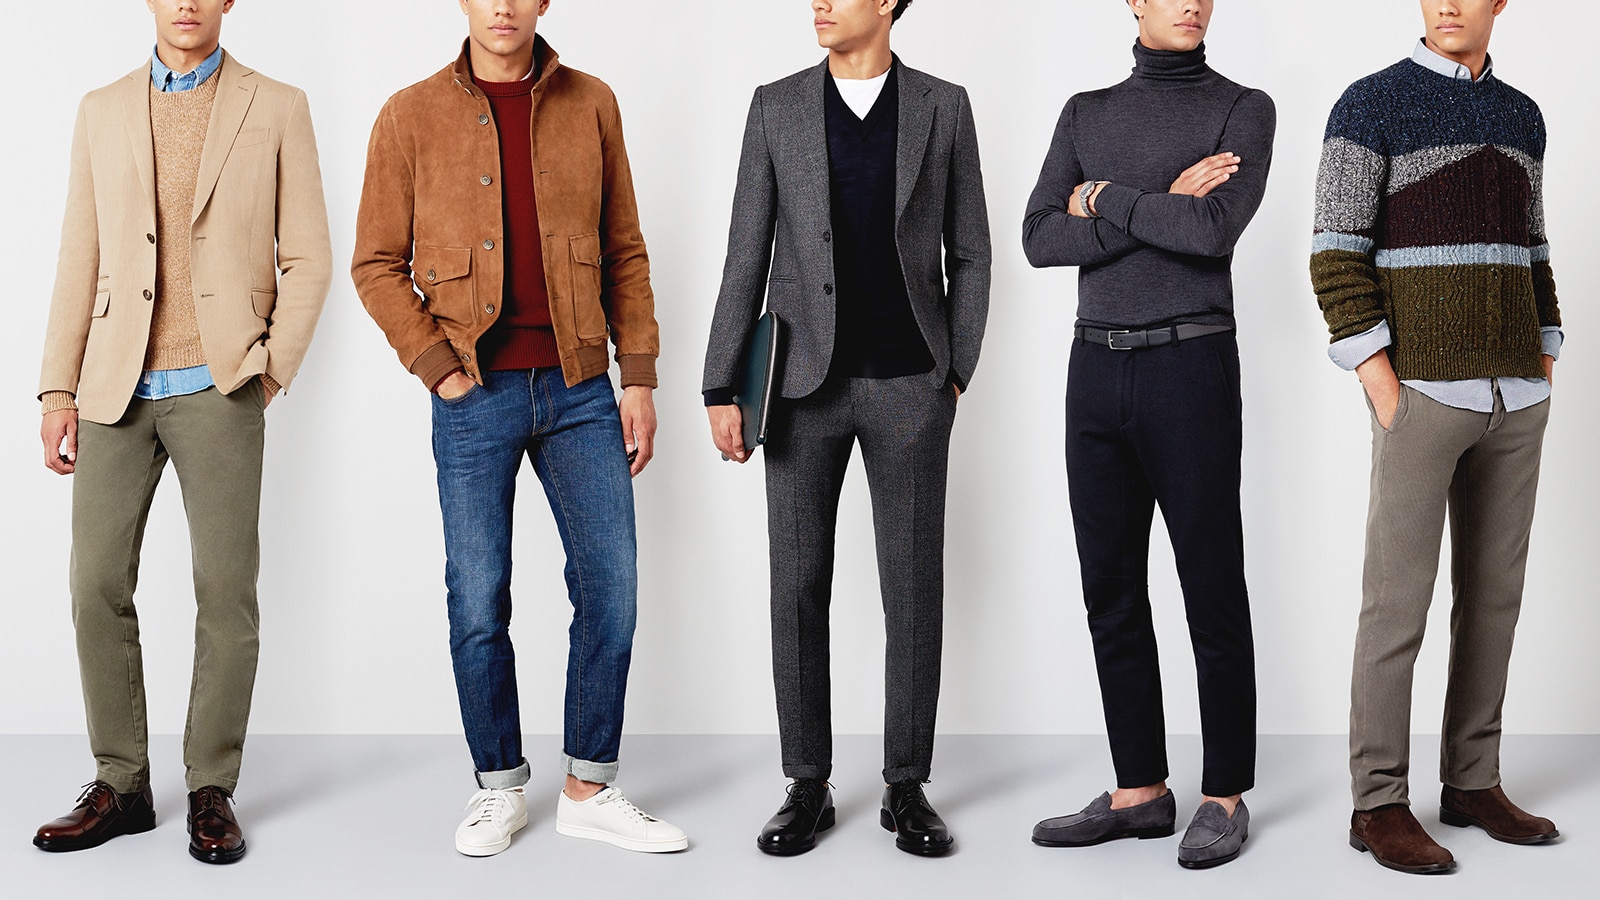 How To Nail Smart-Casual | The Journal | MR PORTER